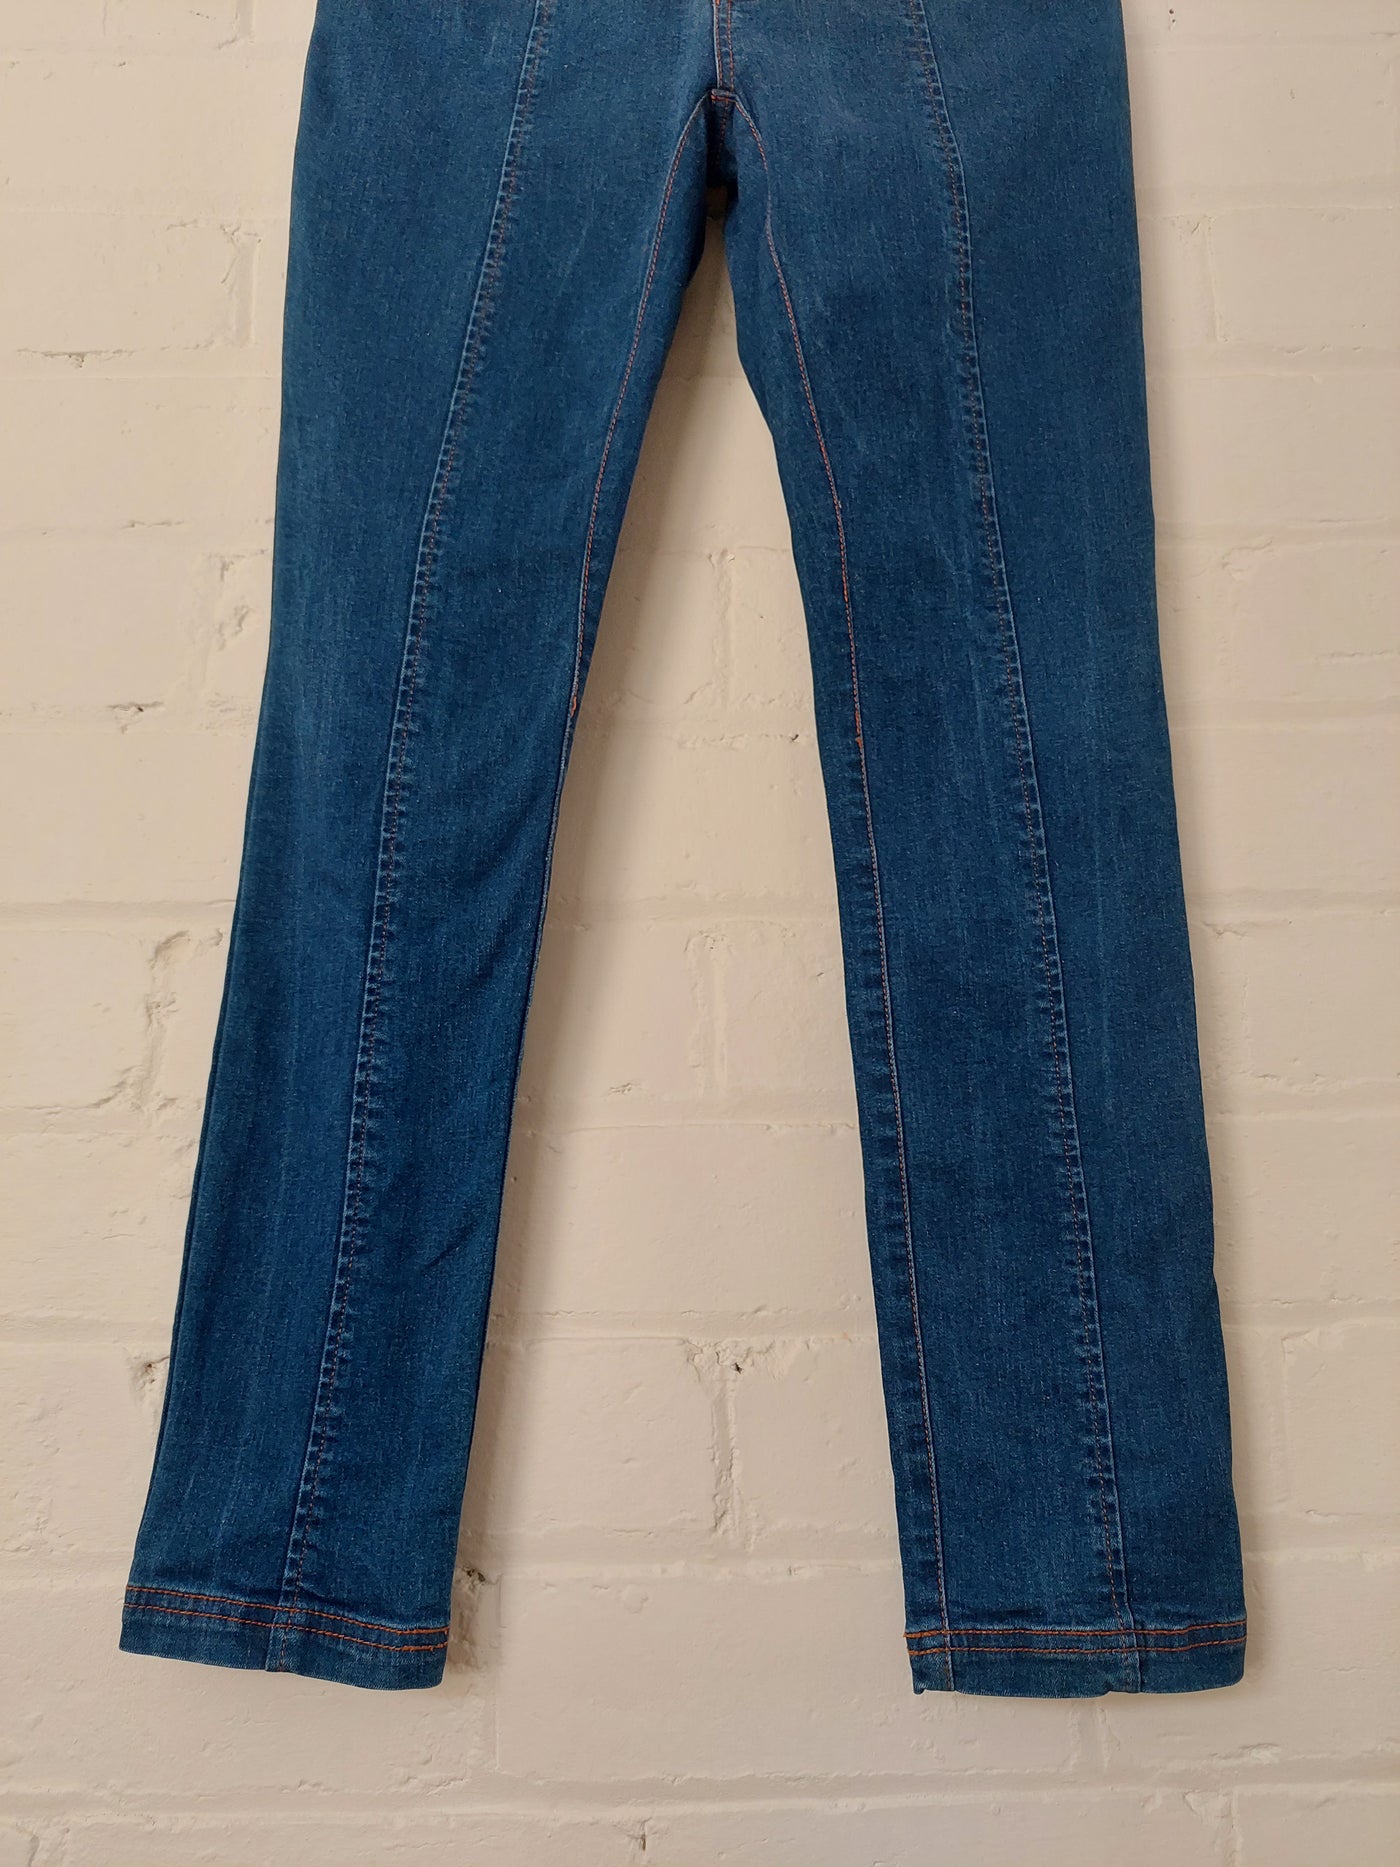 Alice McCall 'Shut the Front J'adore' Jeans, Size 28 (AU 10 / US 6)